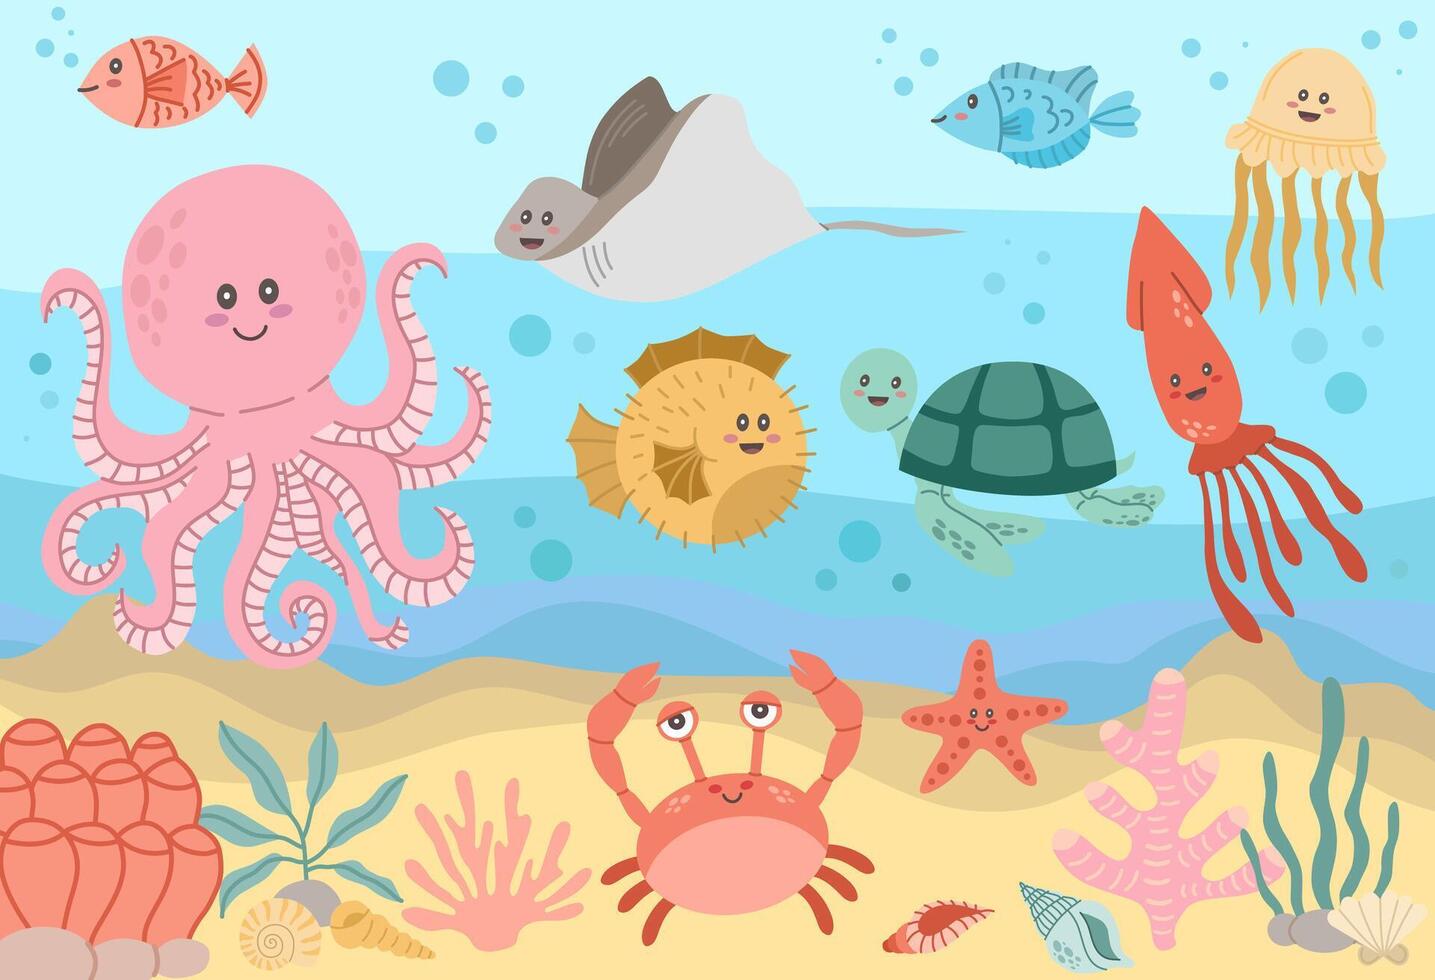 Sea animals in a seascape with corals and sand. Octopus, turtle, jellyfish, fish, stingray and other animals. Vector flat style illustration